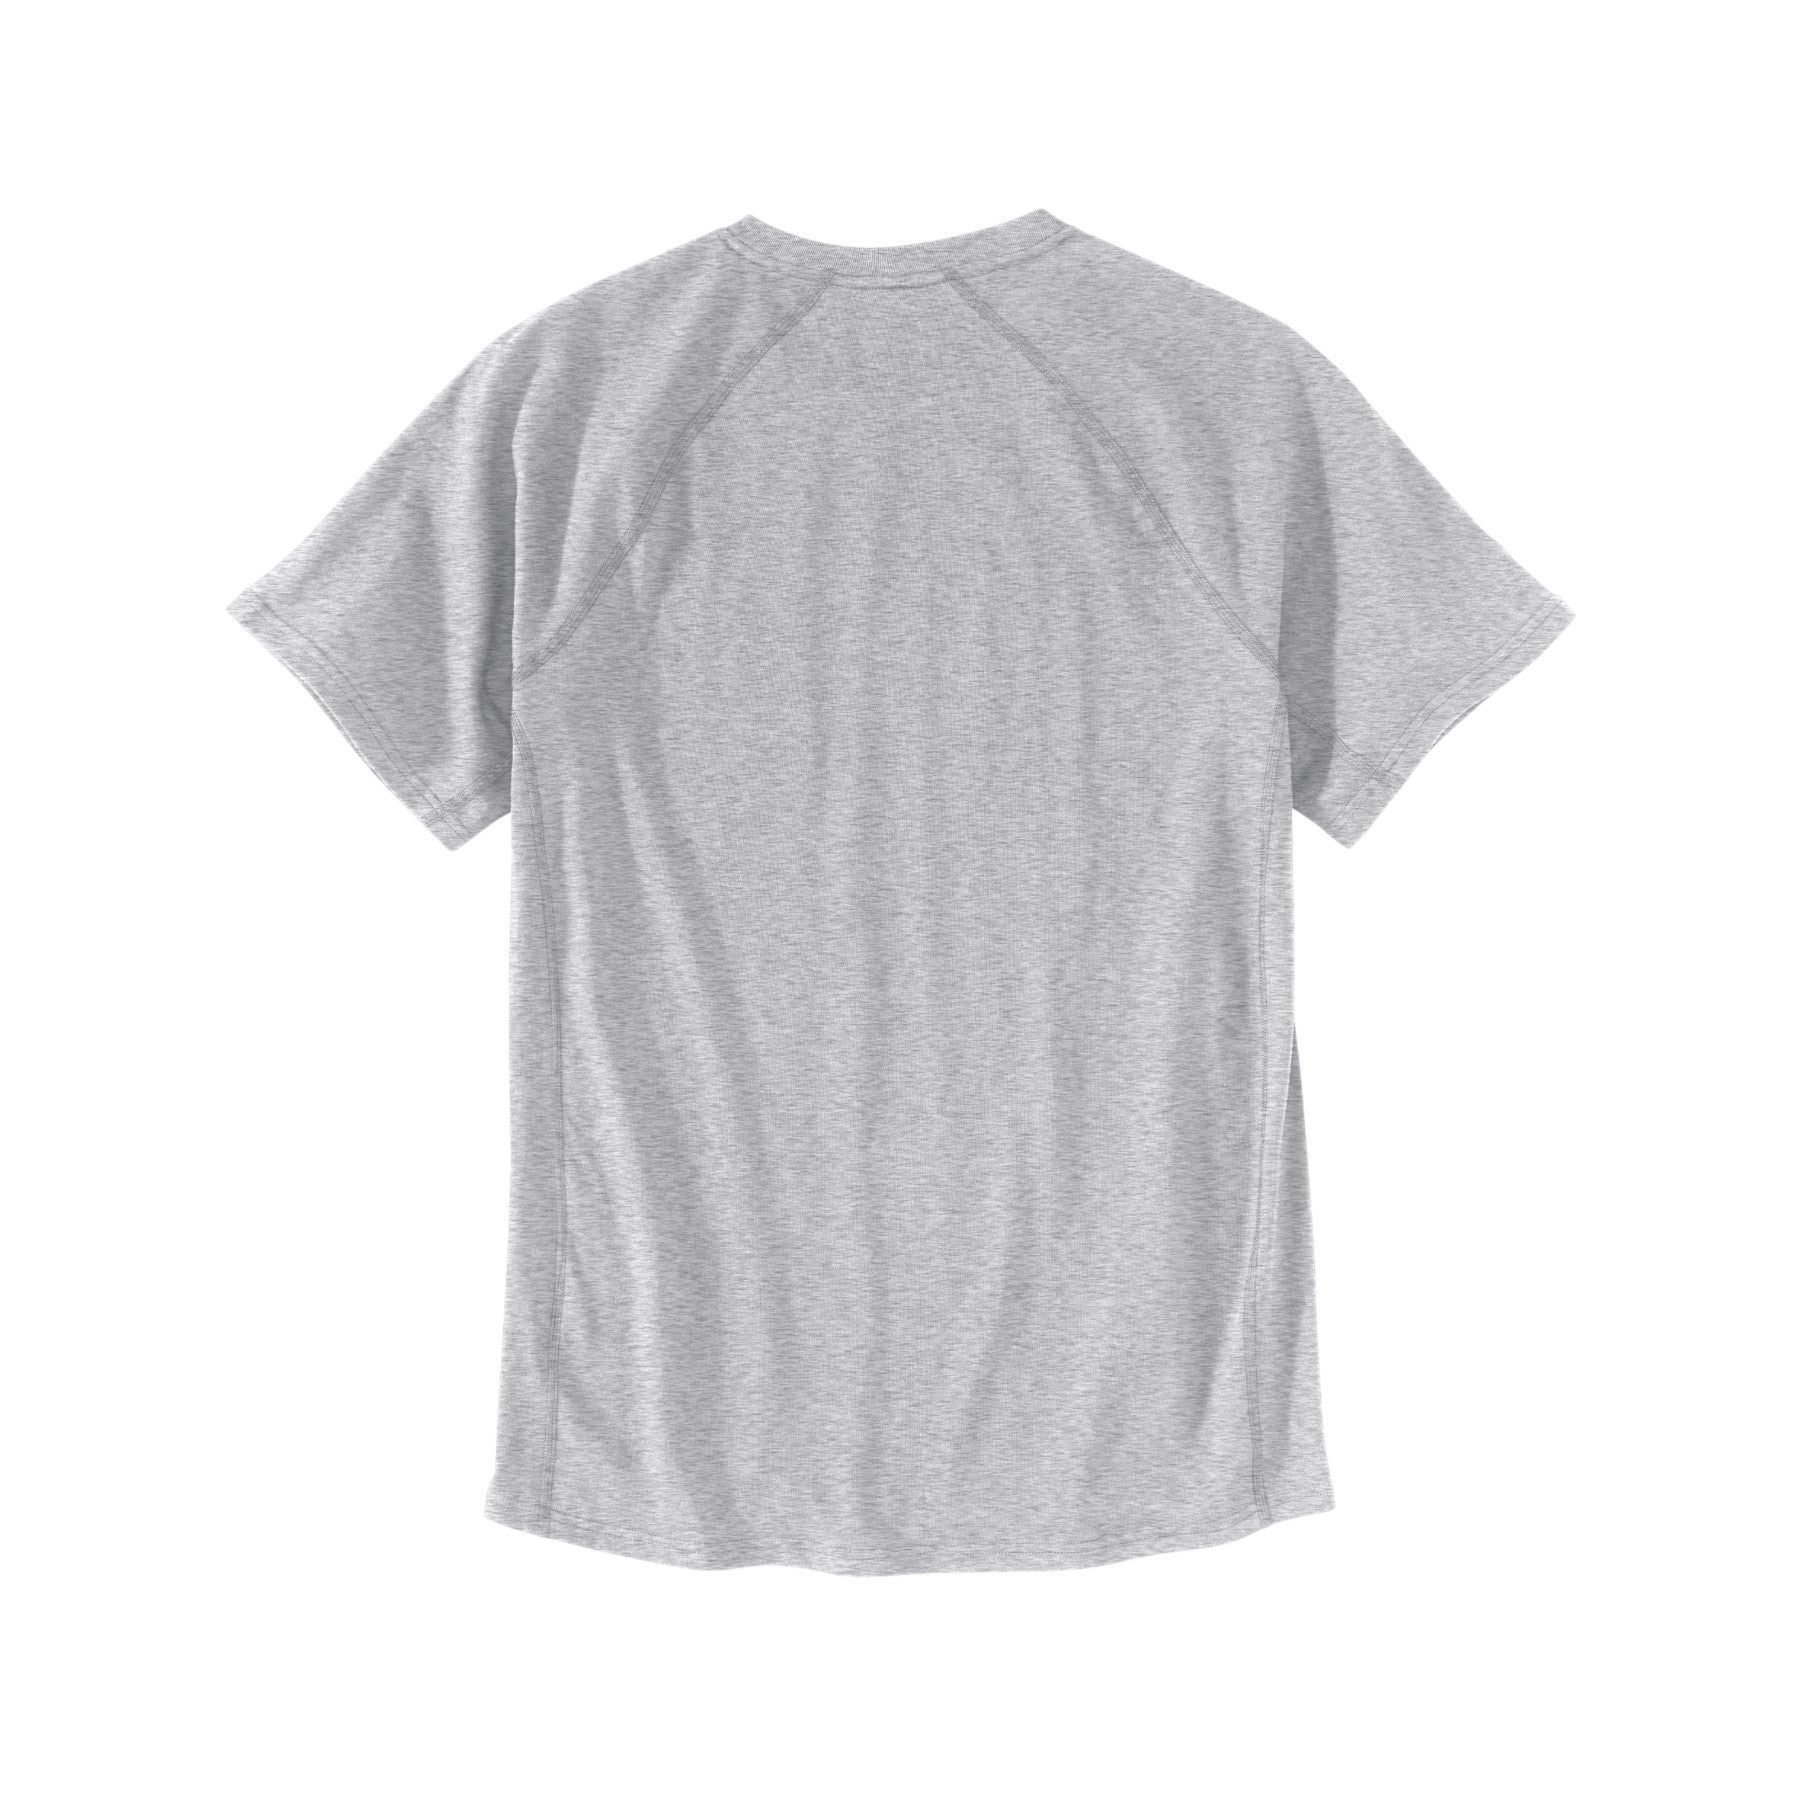 Carhartt Force® Relaxed Fit Midweight Short Sleeve Pocket T-Shirt - Heather Grey